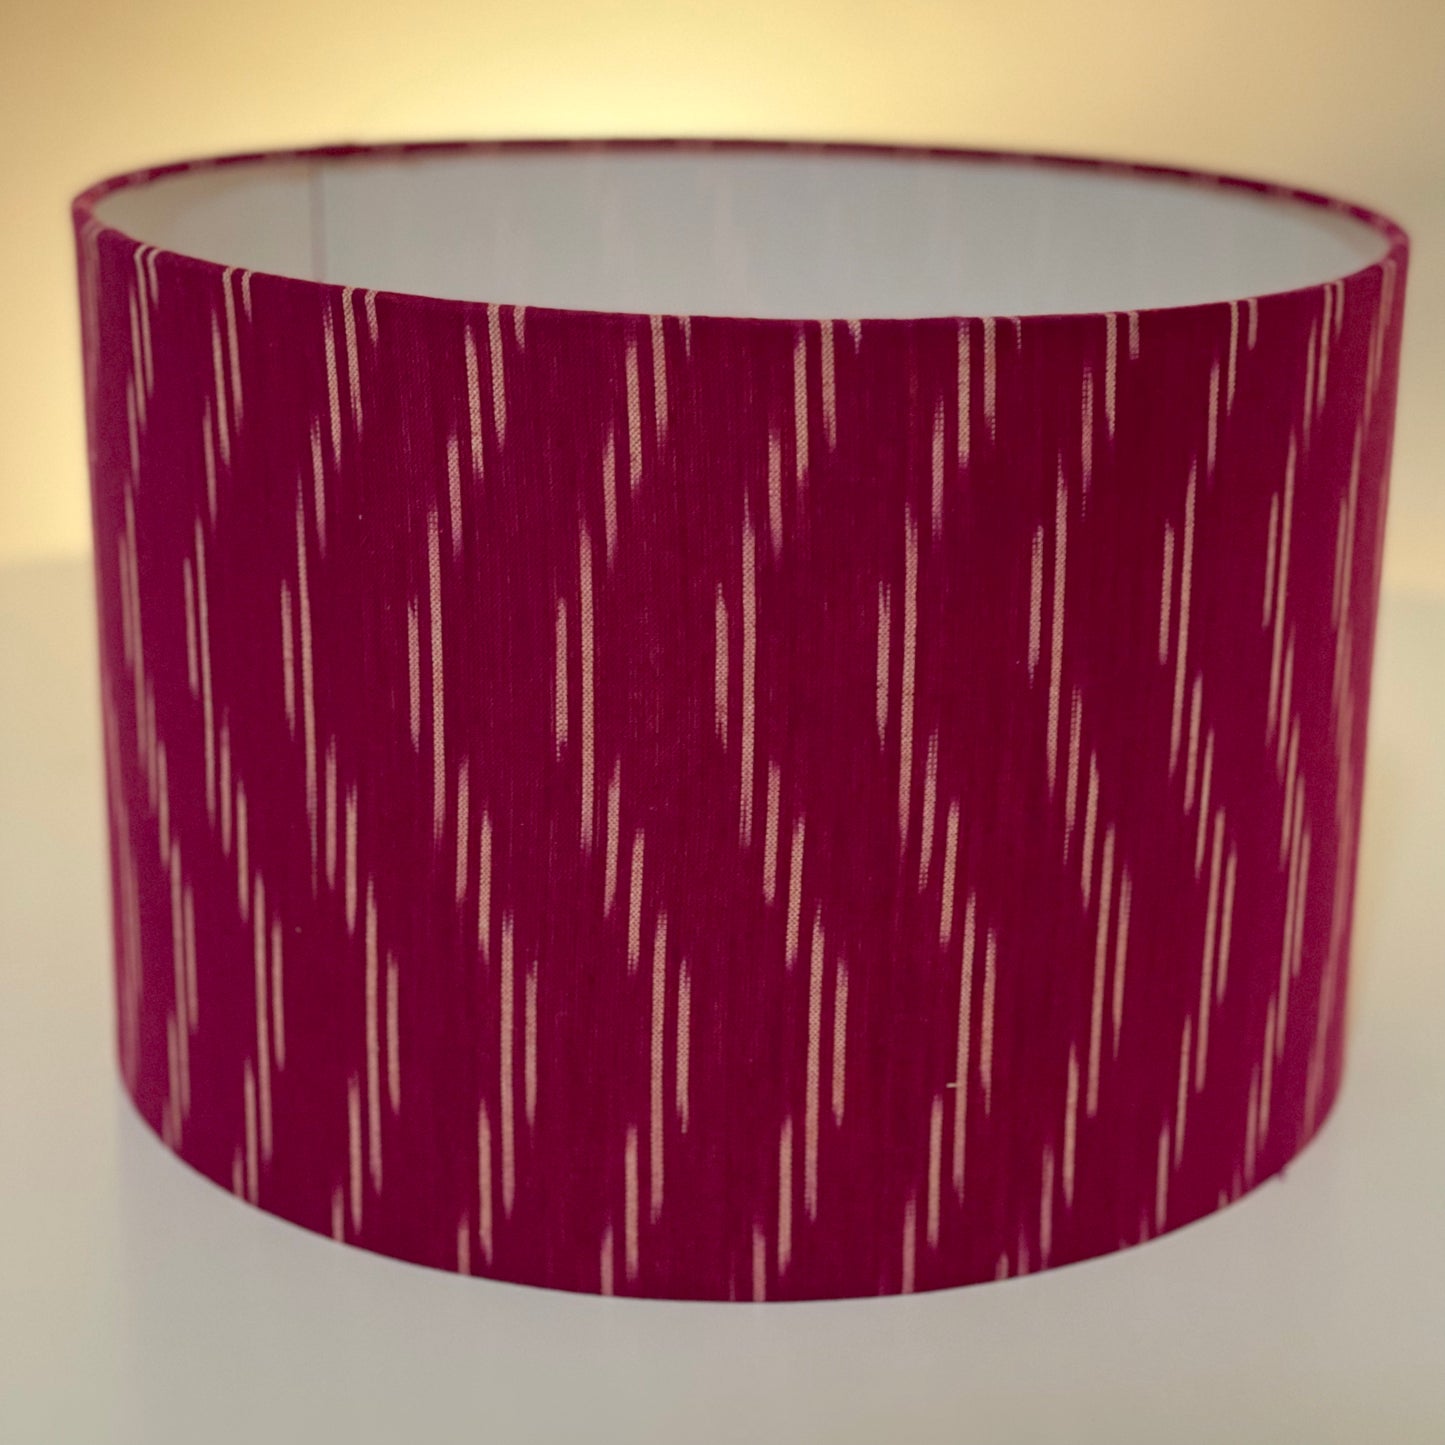 12 Inch Drum Lampshade. Indian Pochampally Ikat Weave Cotton Fabric. Plum and Ivory.